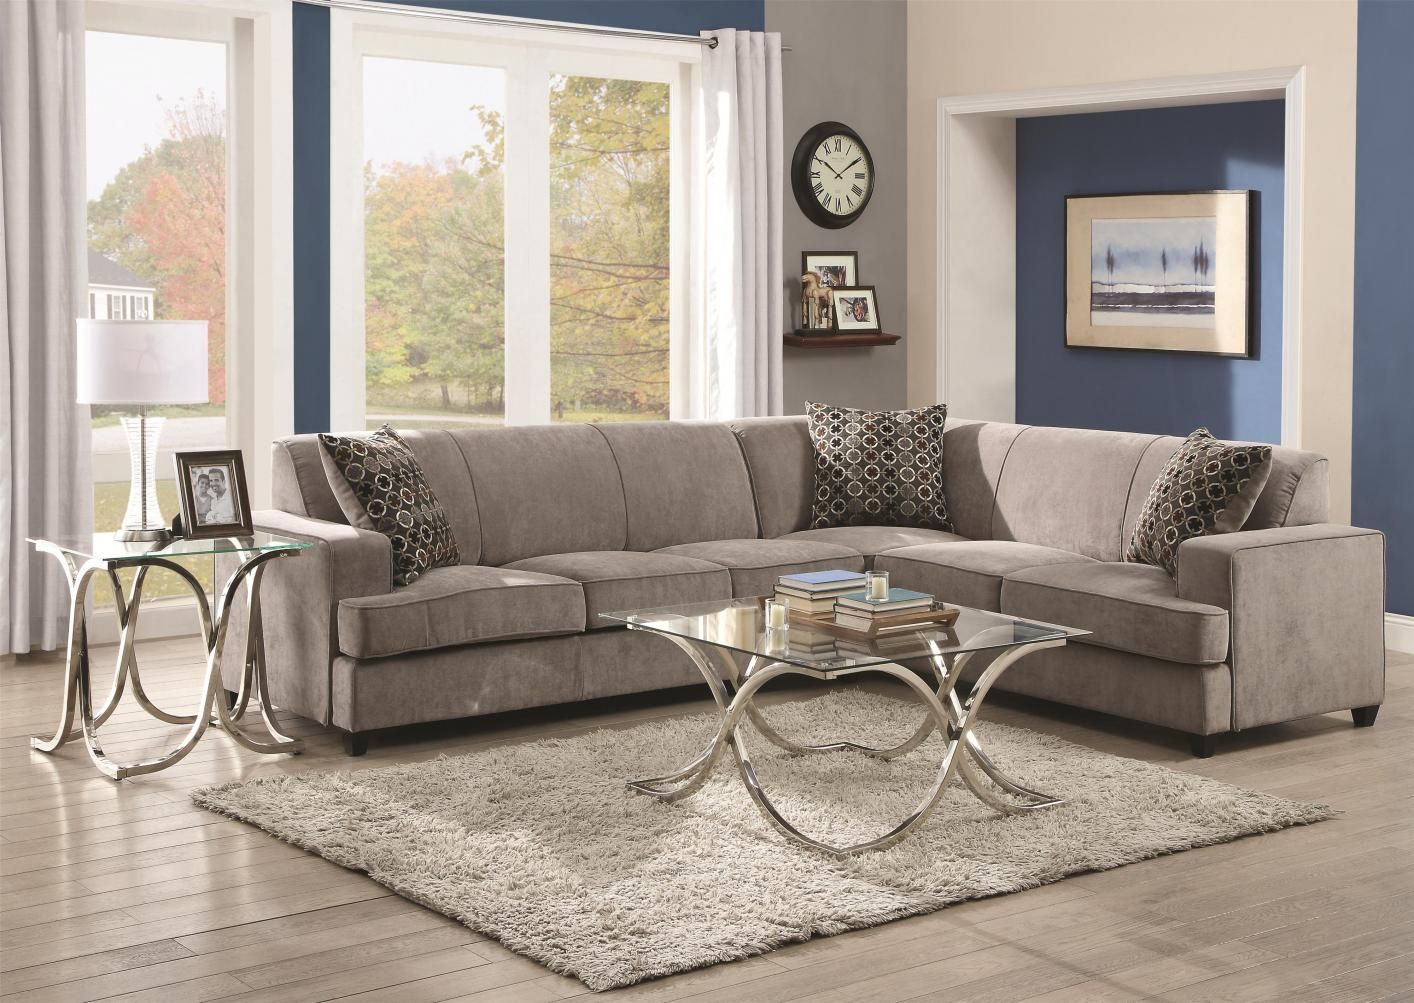 Grey Fabric Sectional Sleeper Sofa – Steal A Sofa In Sectional Sofas In Gray (View 5 of 15)